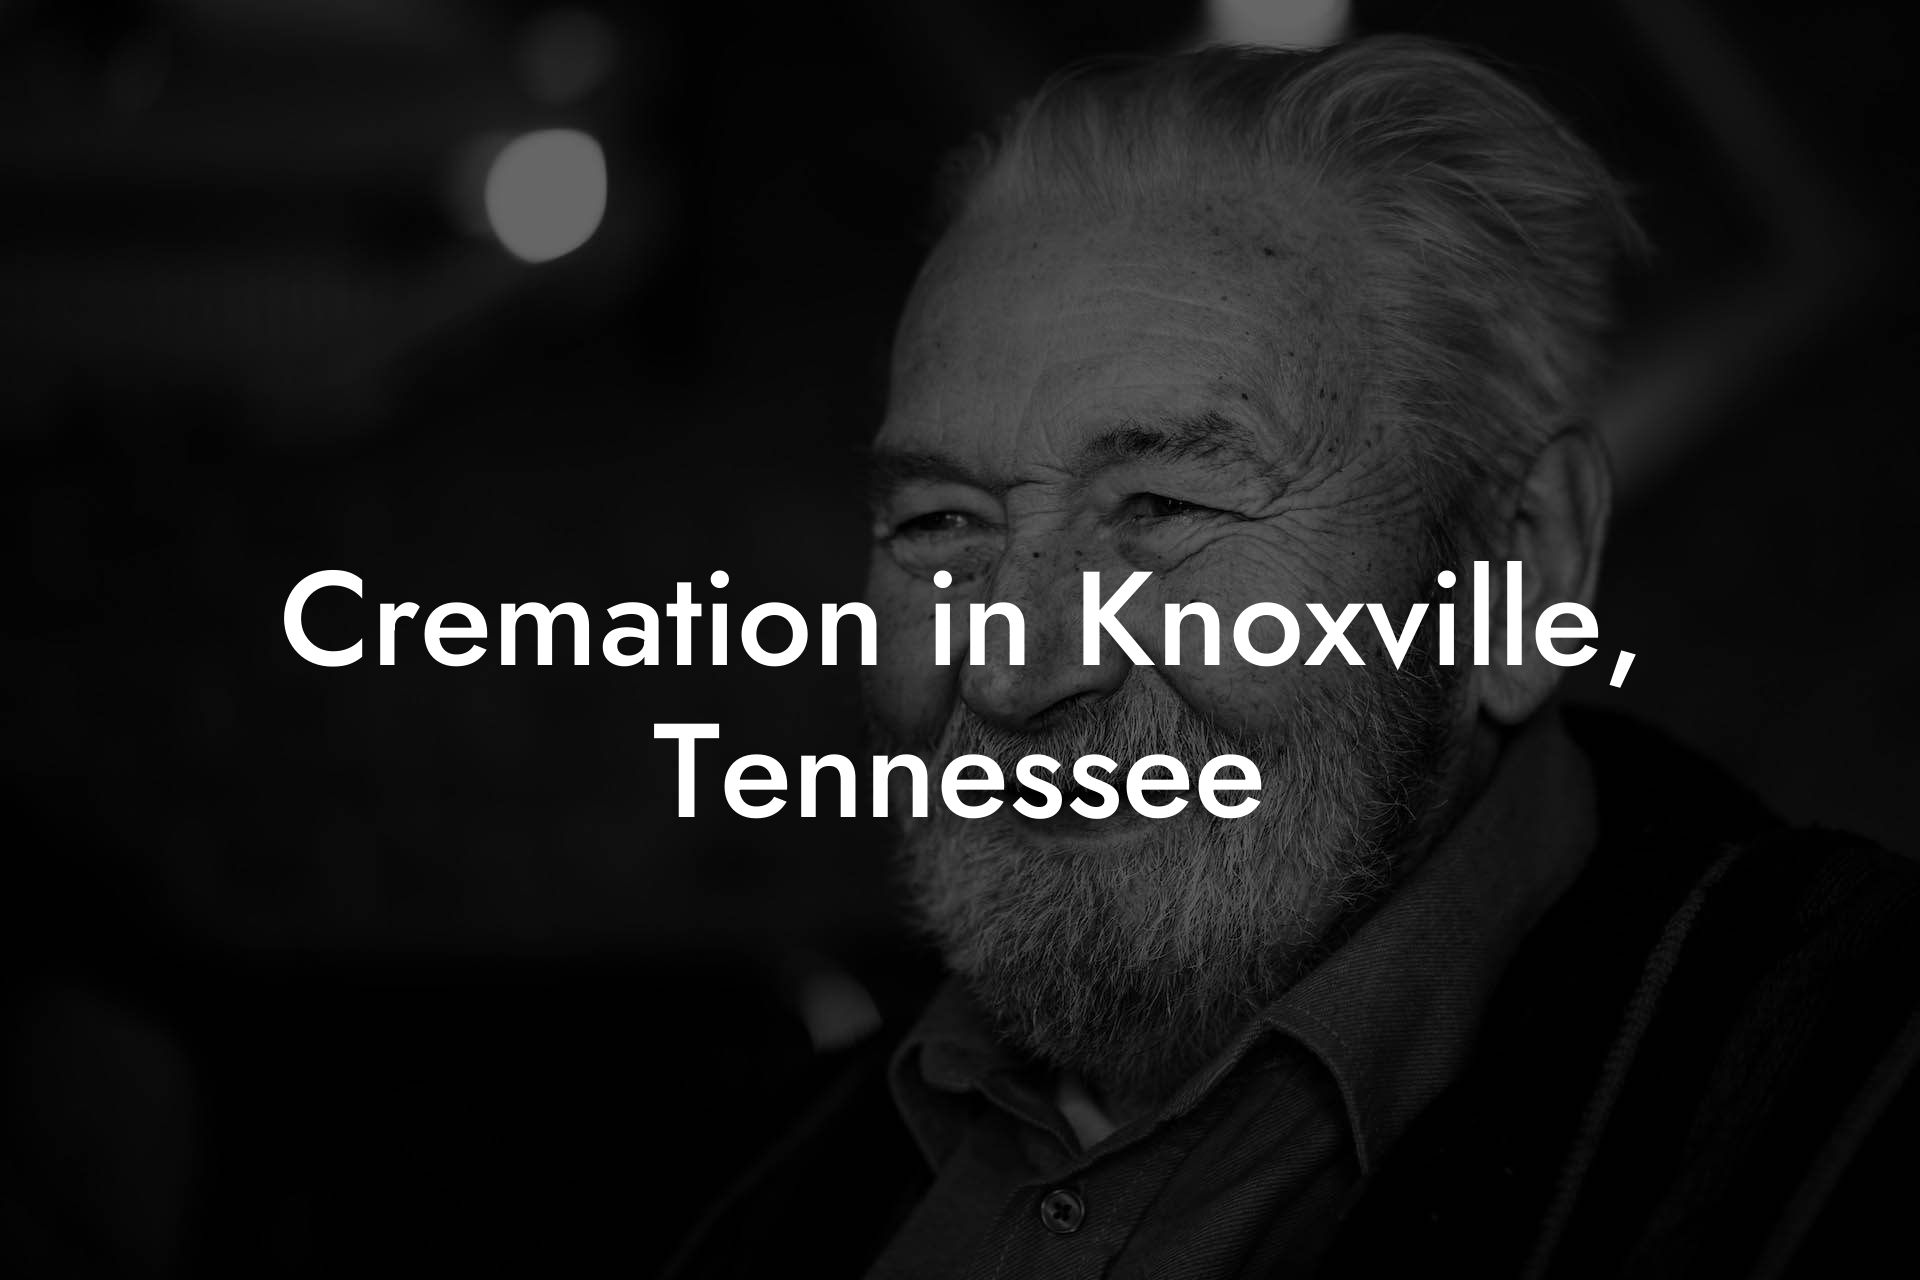 Cremation in Knoxville, Tennessee